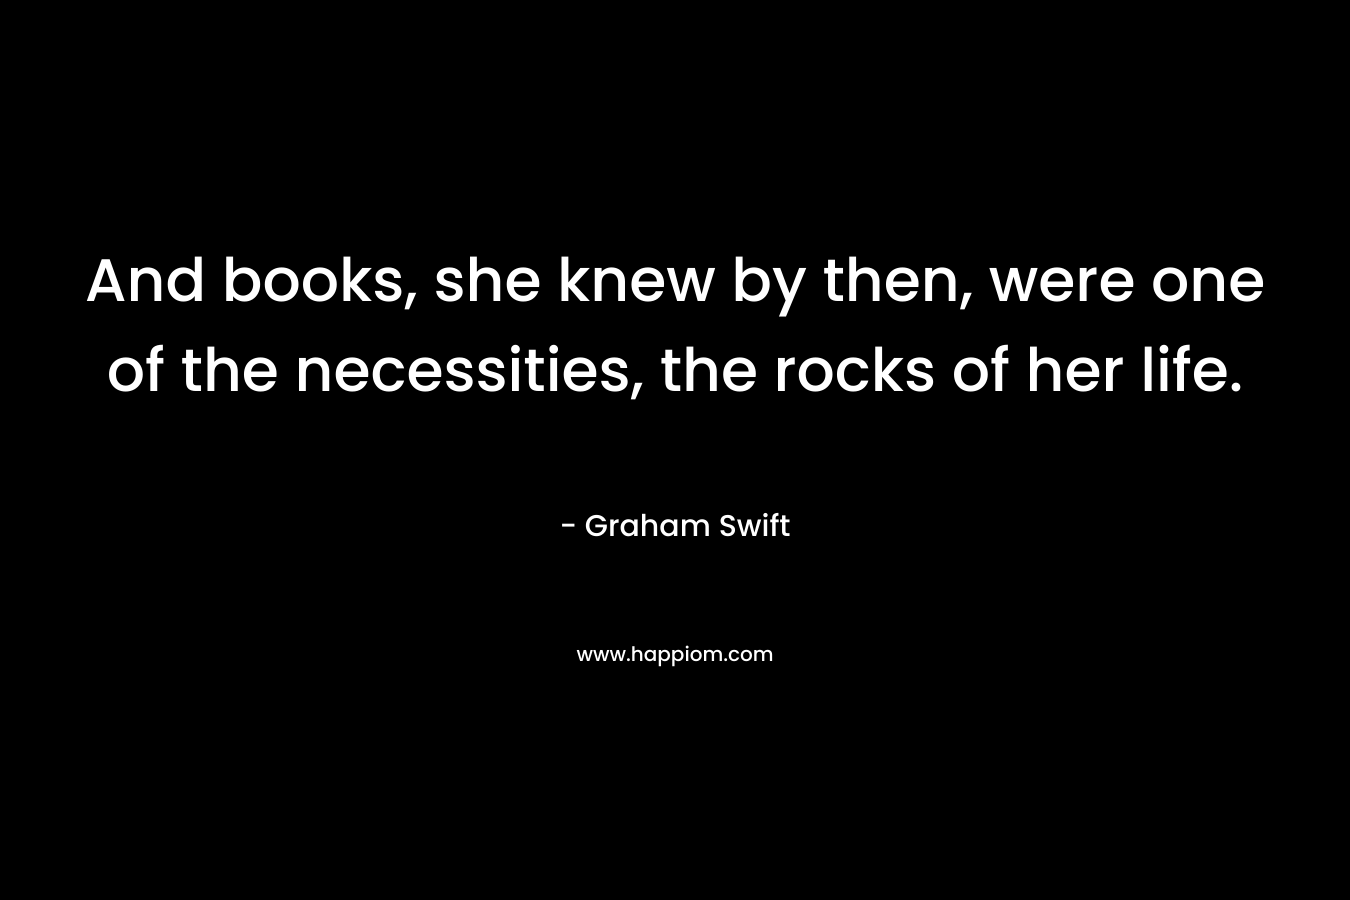 And books, she knew by then, were one of the necessities, the rocks of her life.